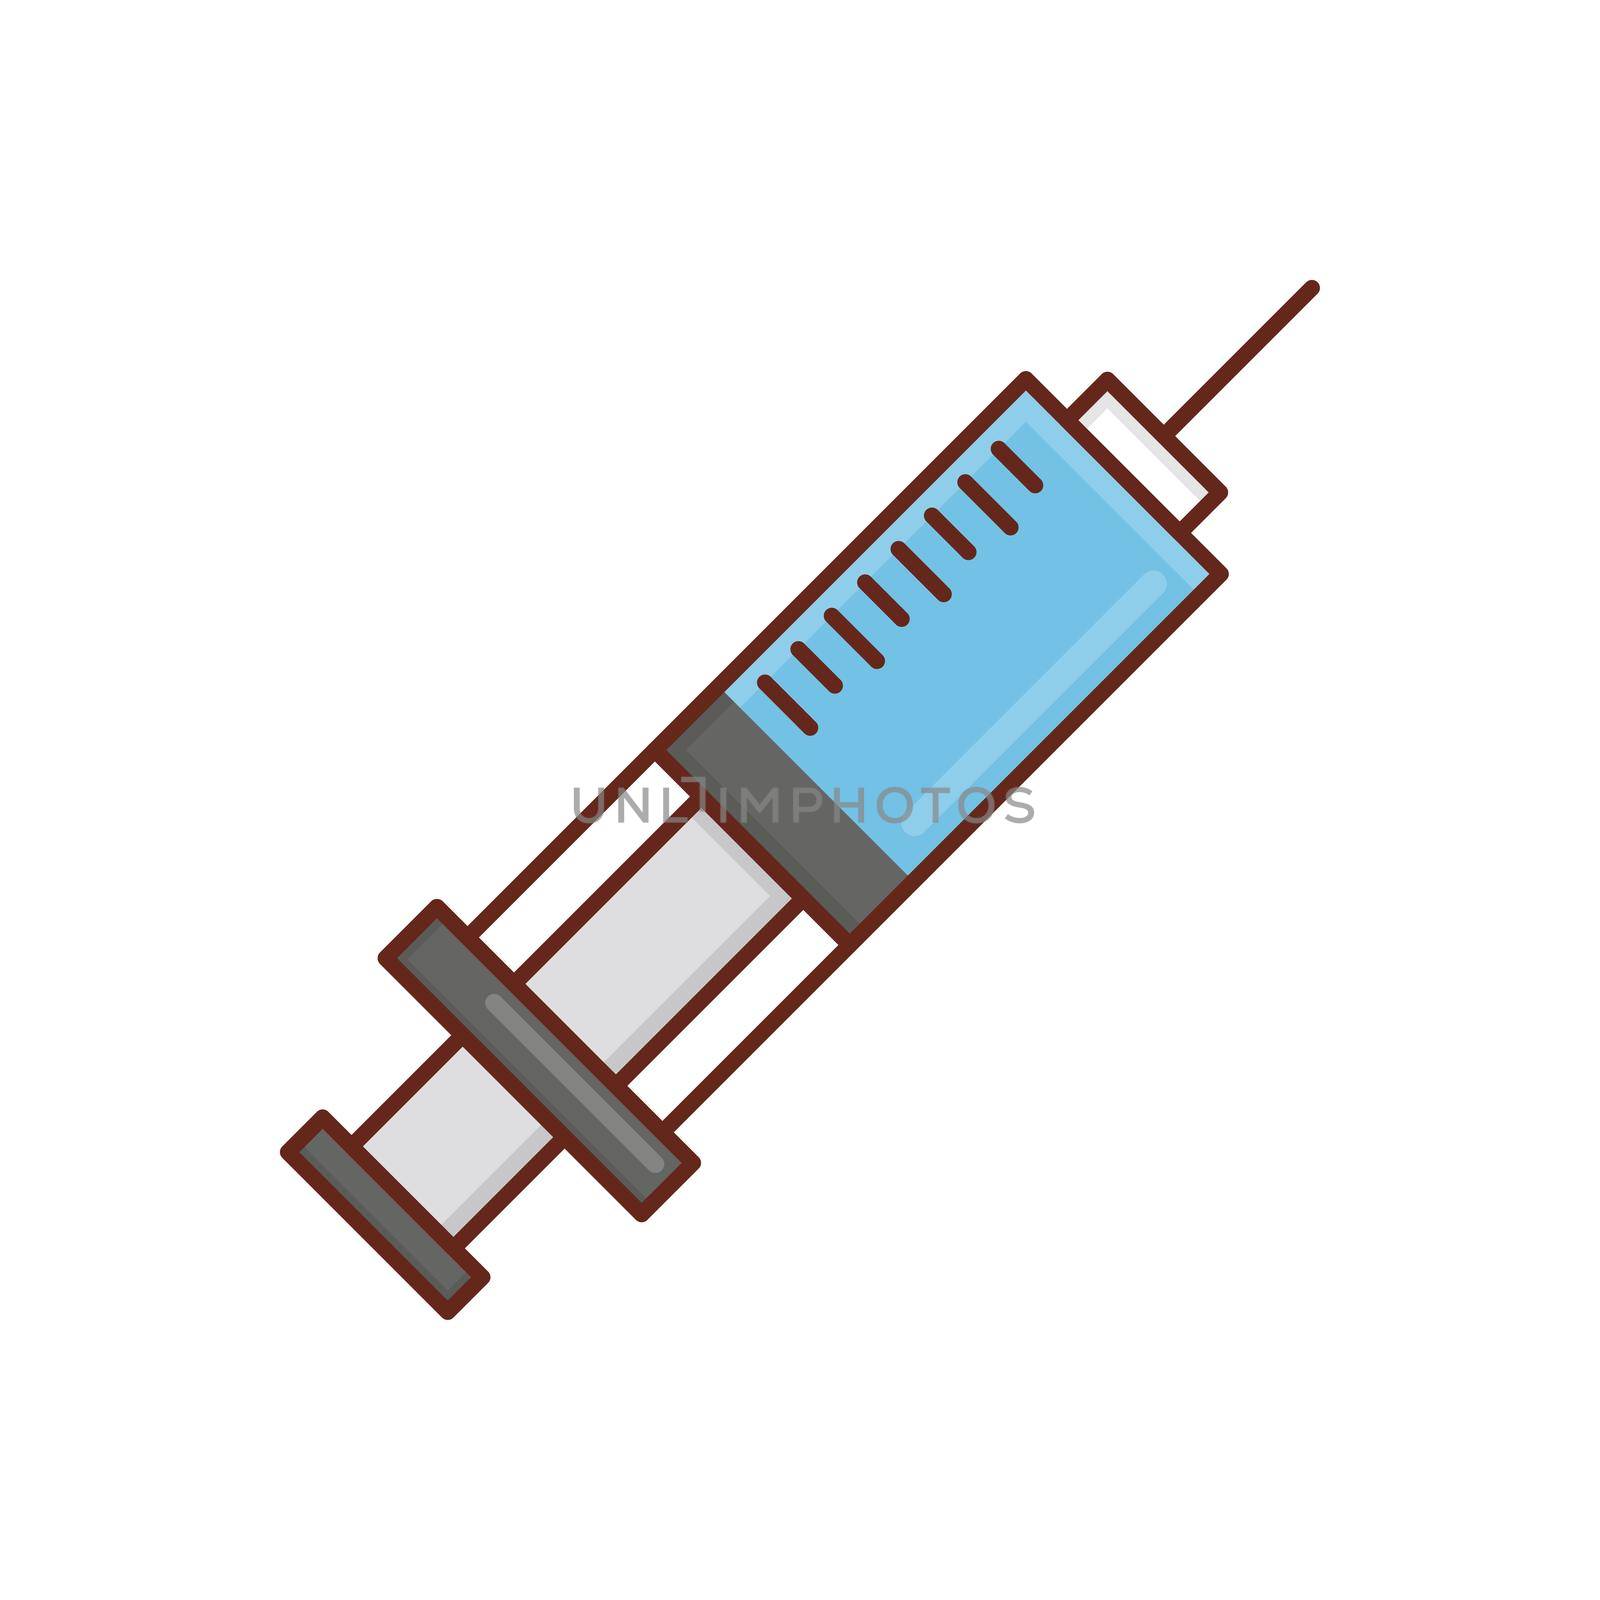 injection by FlaticonsDesign